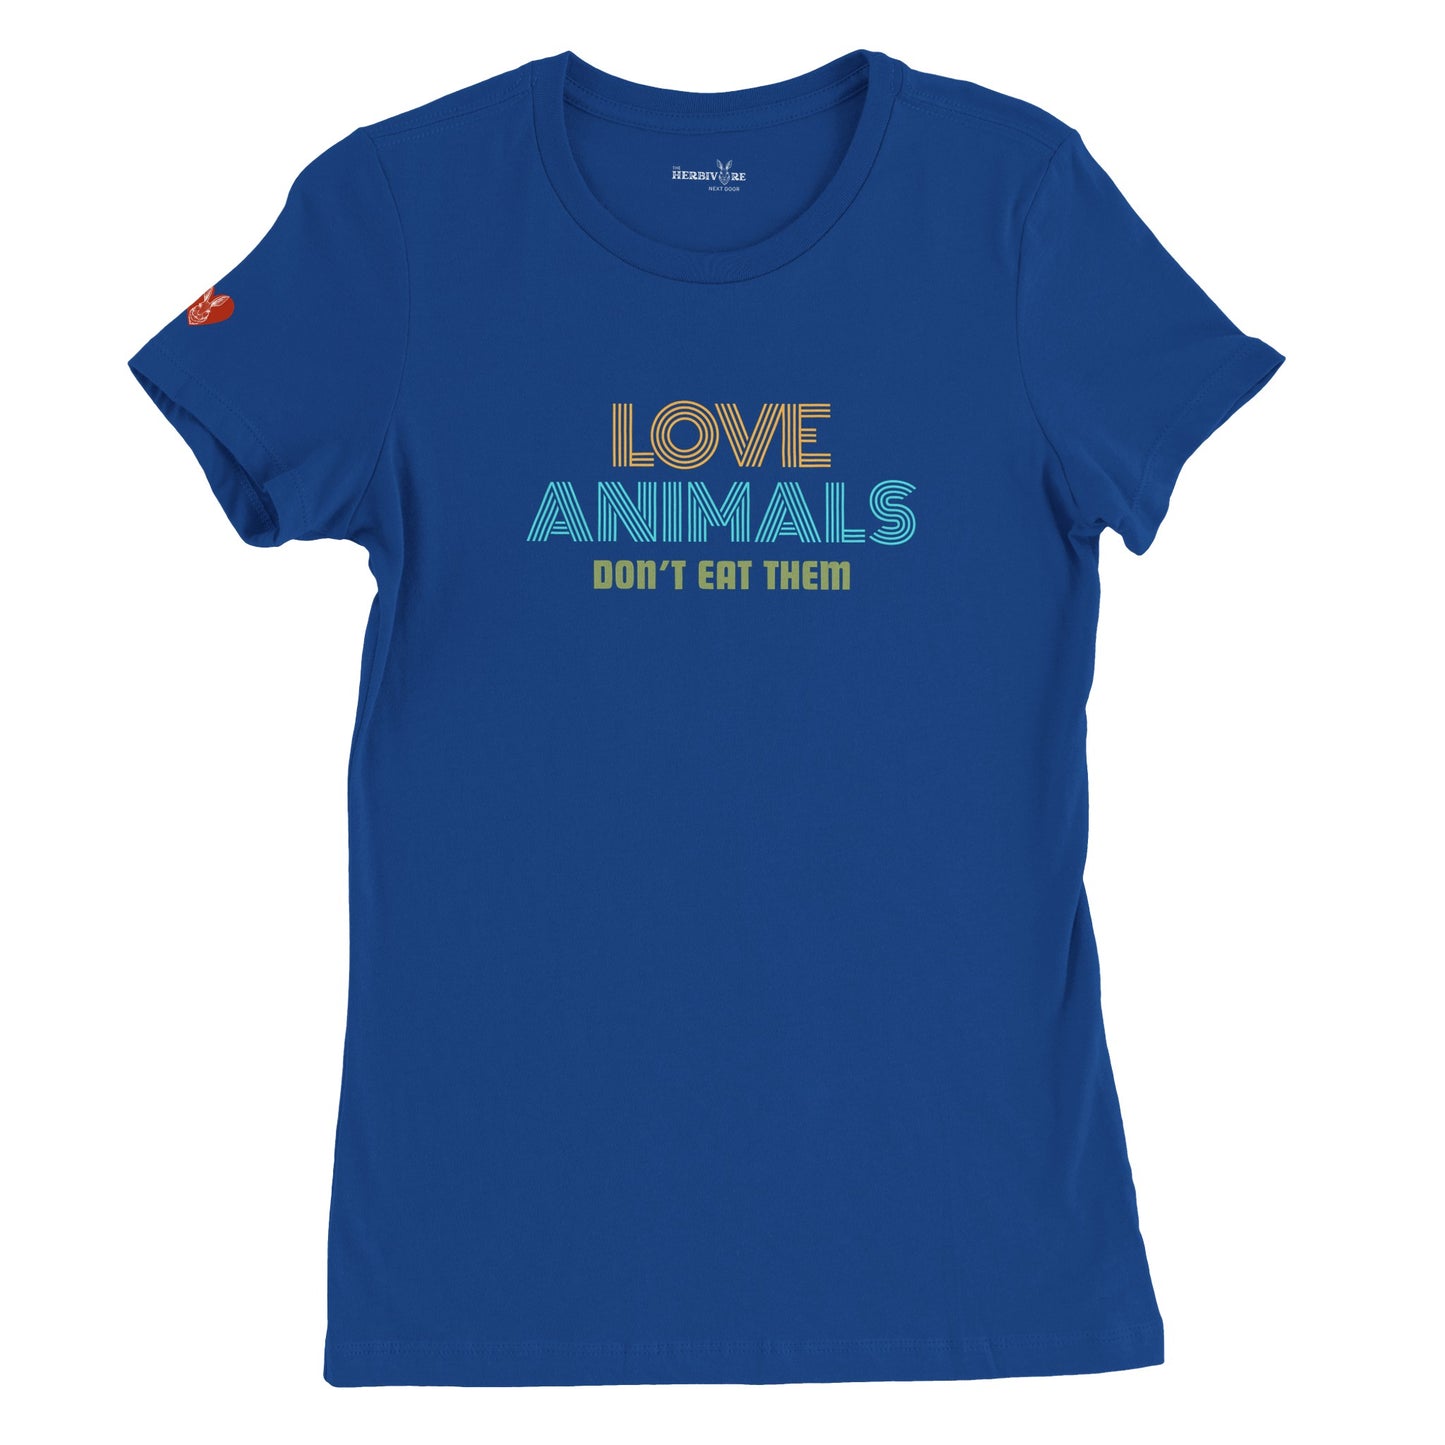 Love Animals, Don't Eat Them - Women's Style (Women's run small - get one size up from normal unisex)